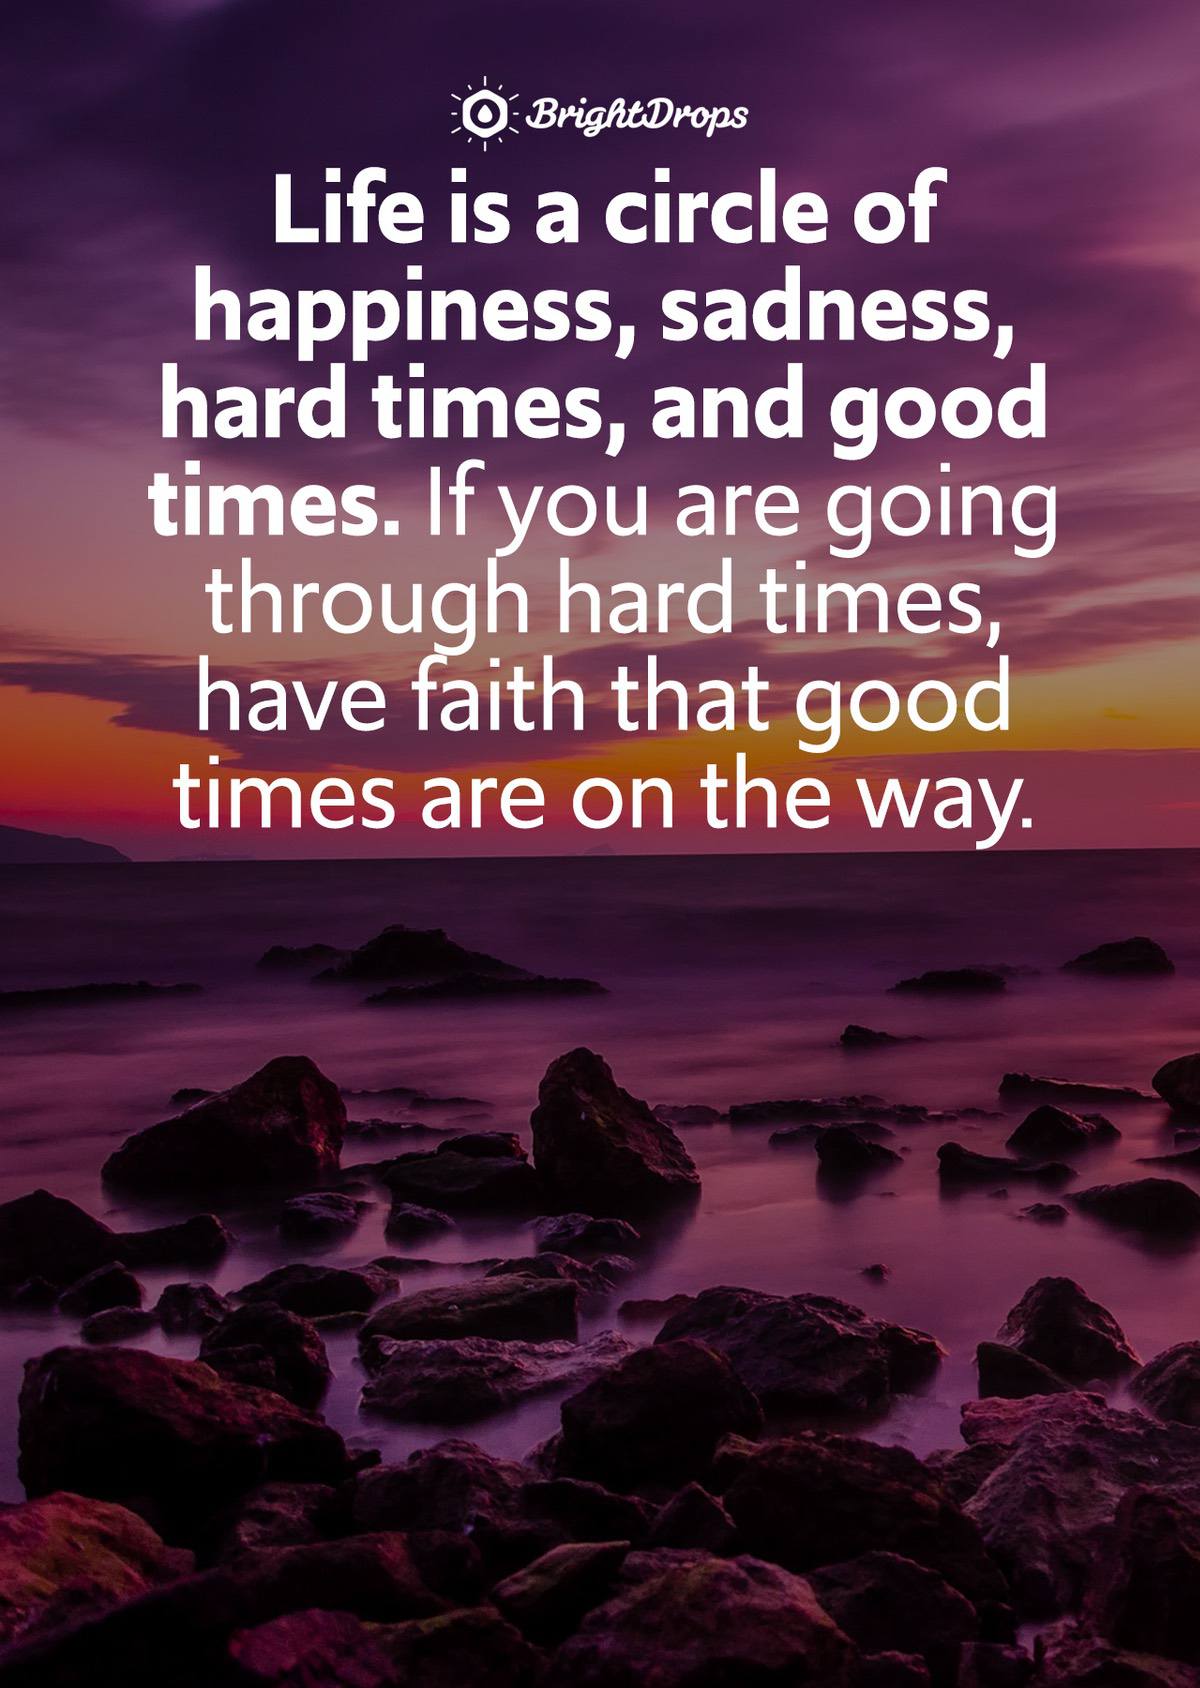 Life is a circle of happiness, sadness, hard times, and good times. If you are going through hard times, have faith that good times are on the way.